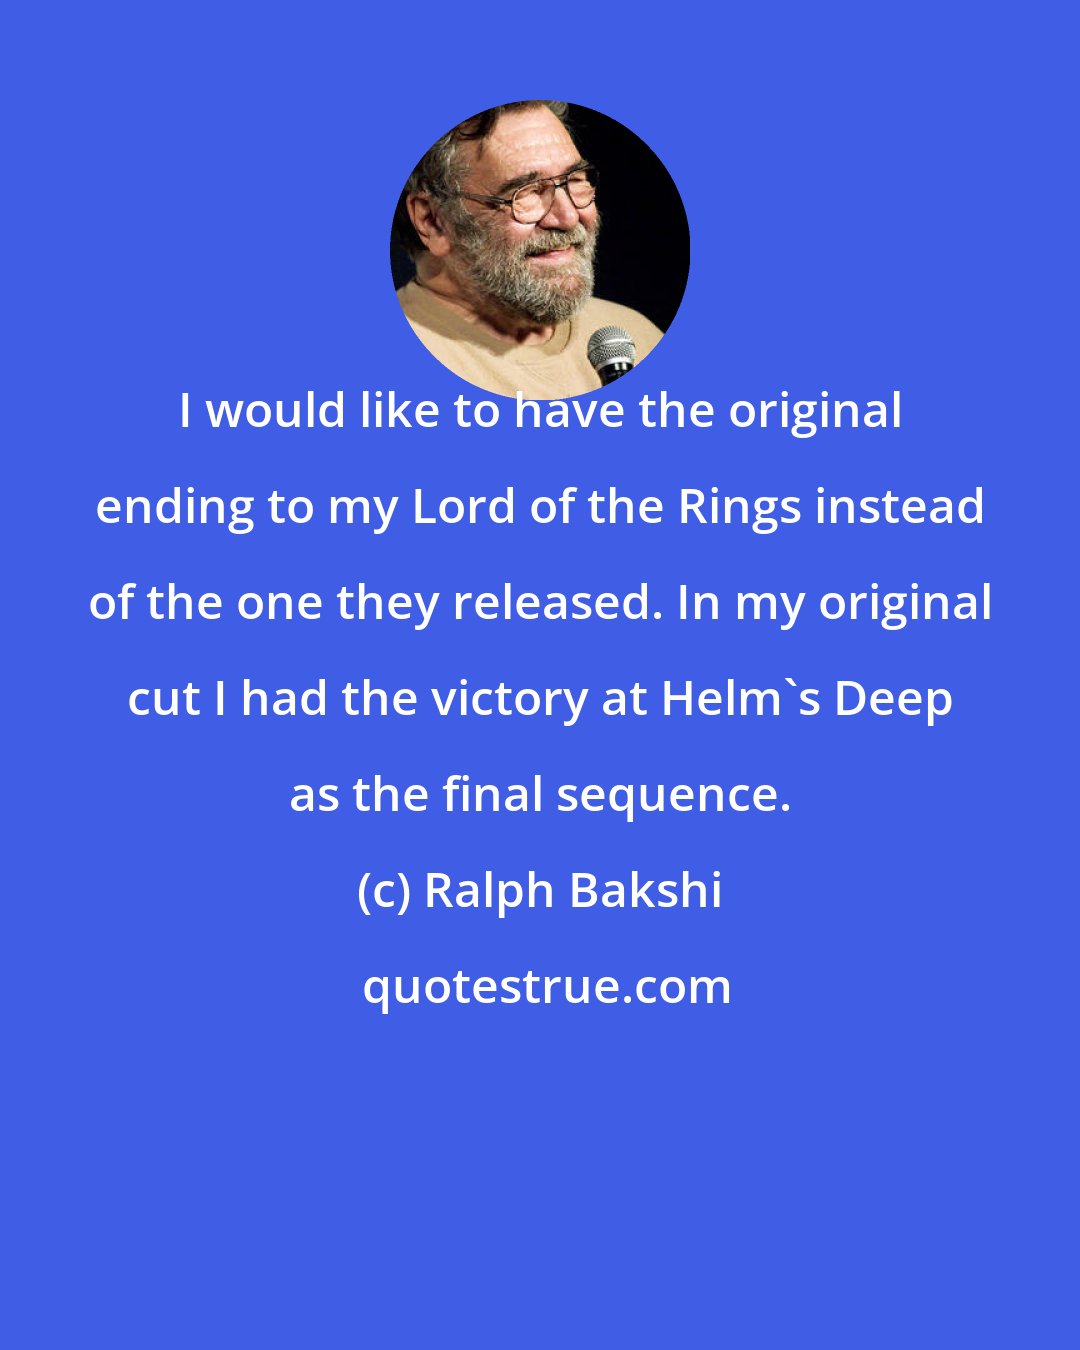 Ralph Bakshi: I would like to have the original ending to my Lord of the Rings instead of the one they released. In my original cut I had the victory at Helm's Deep as the final sequence.